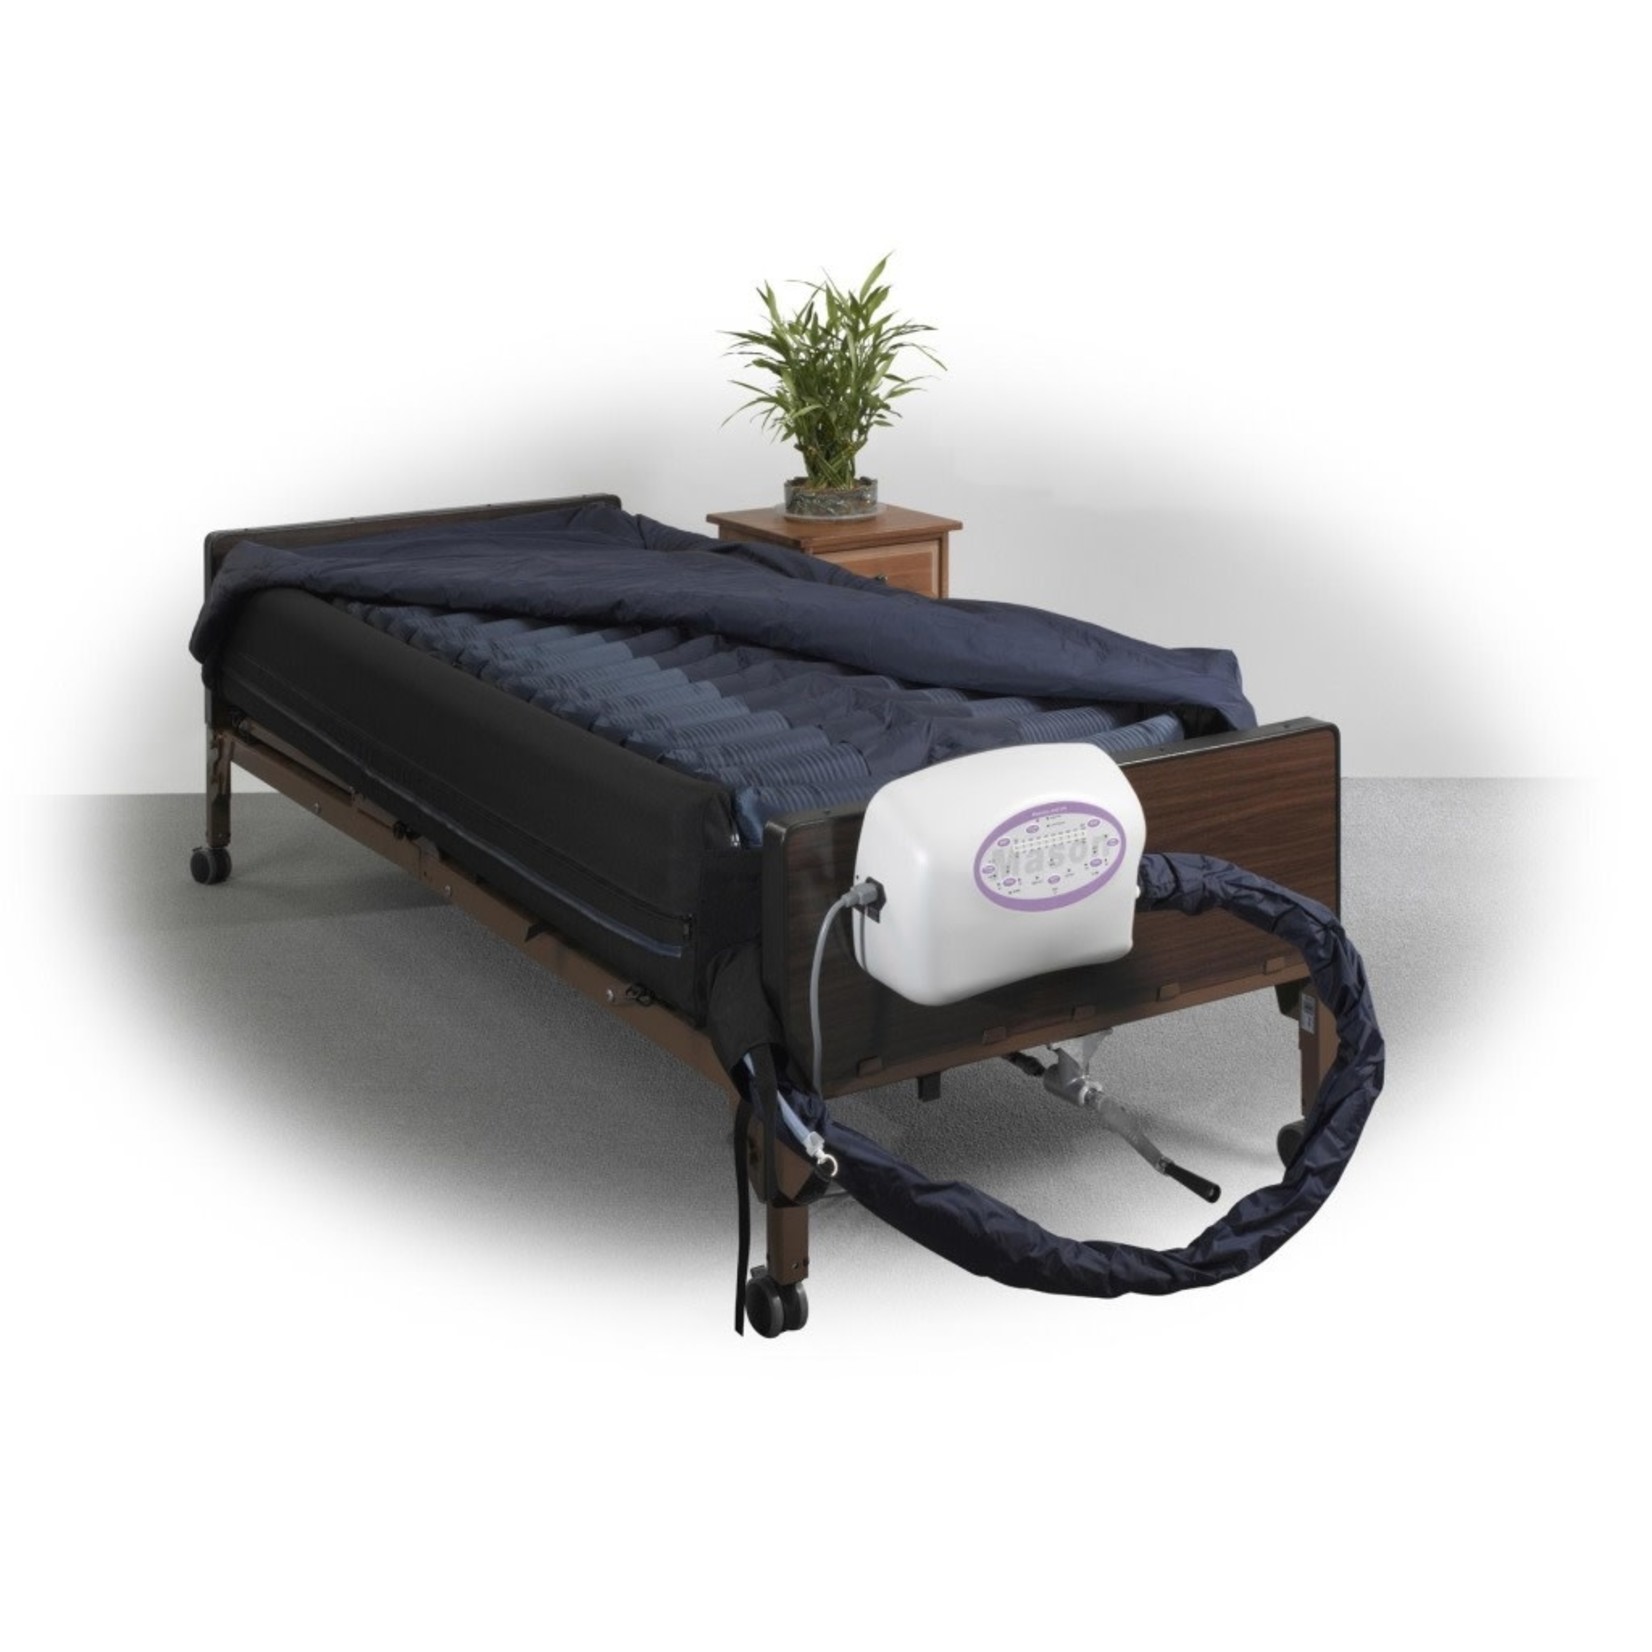 Drive LS9500 10 Lateral Rotation Mattress with on Demand Low Air Loss